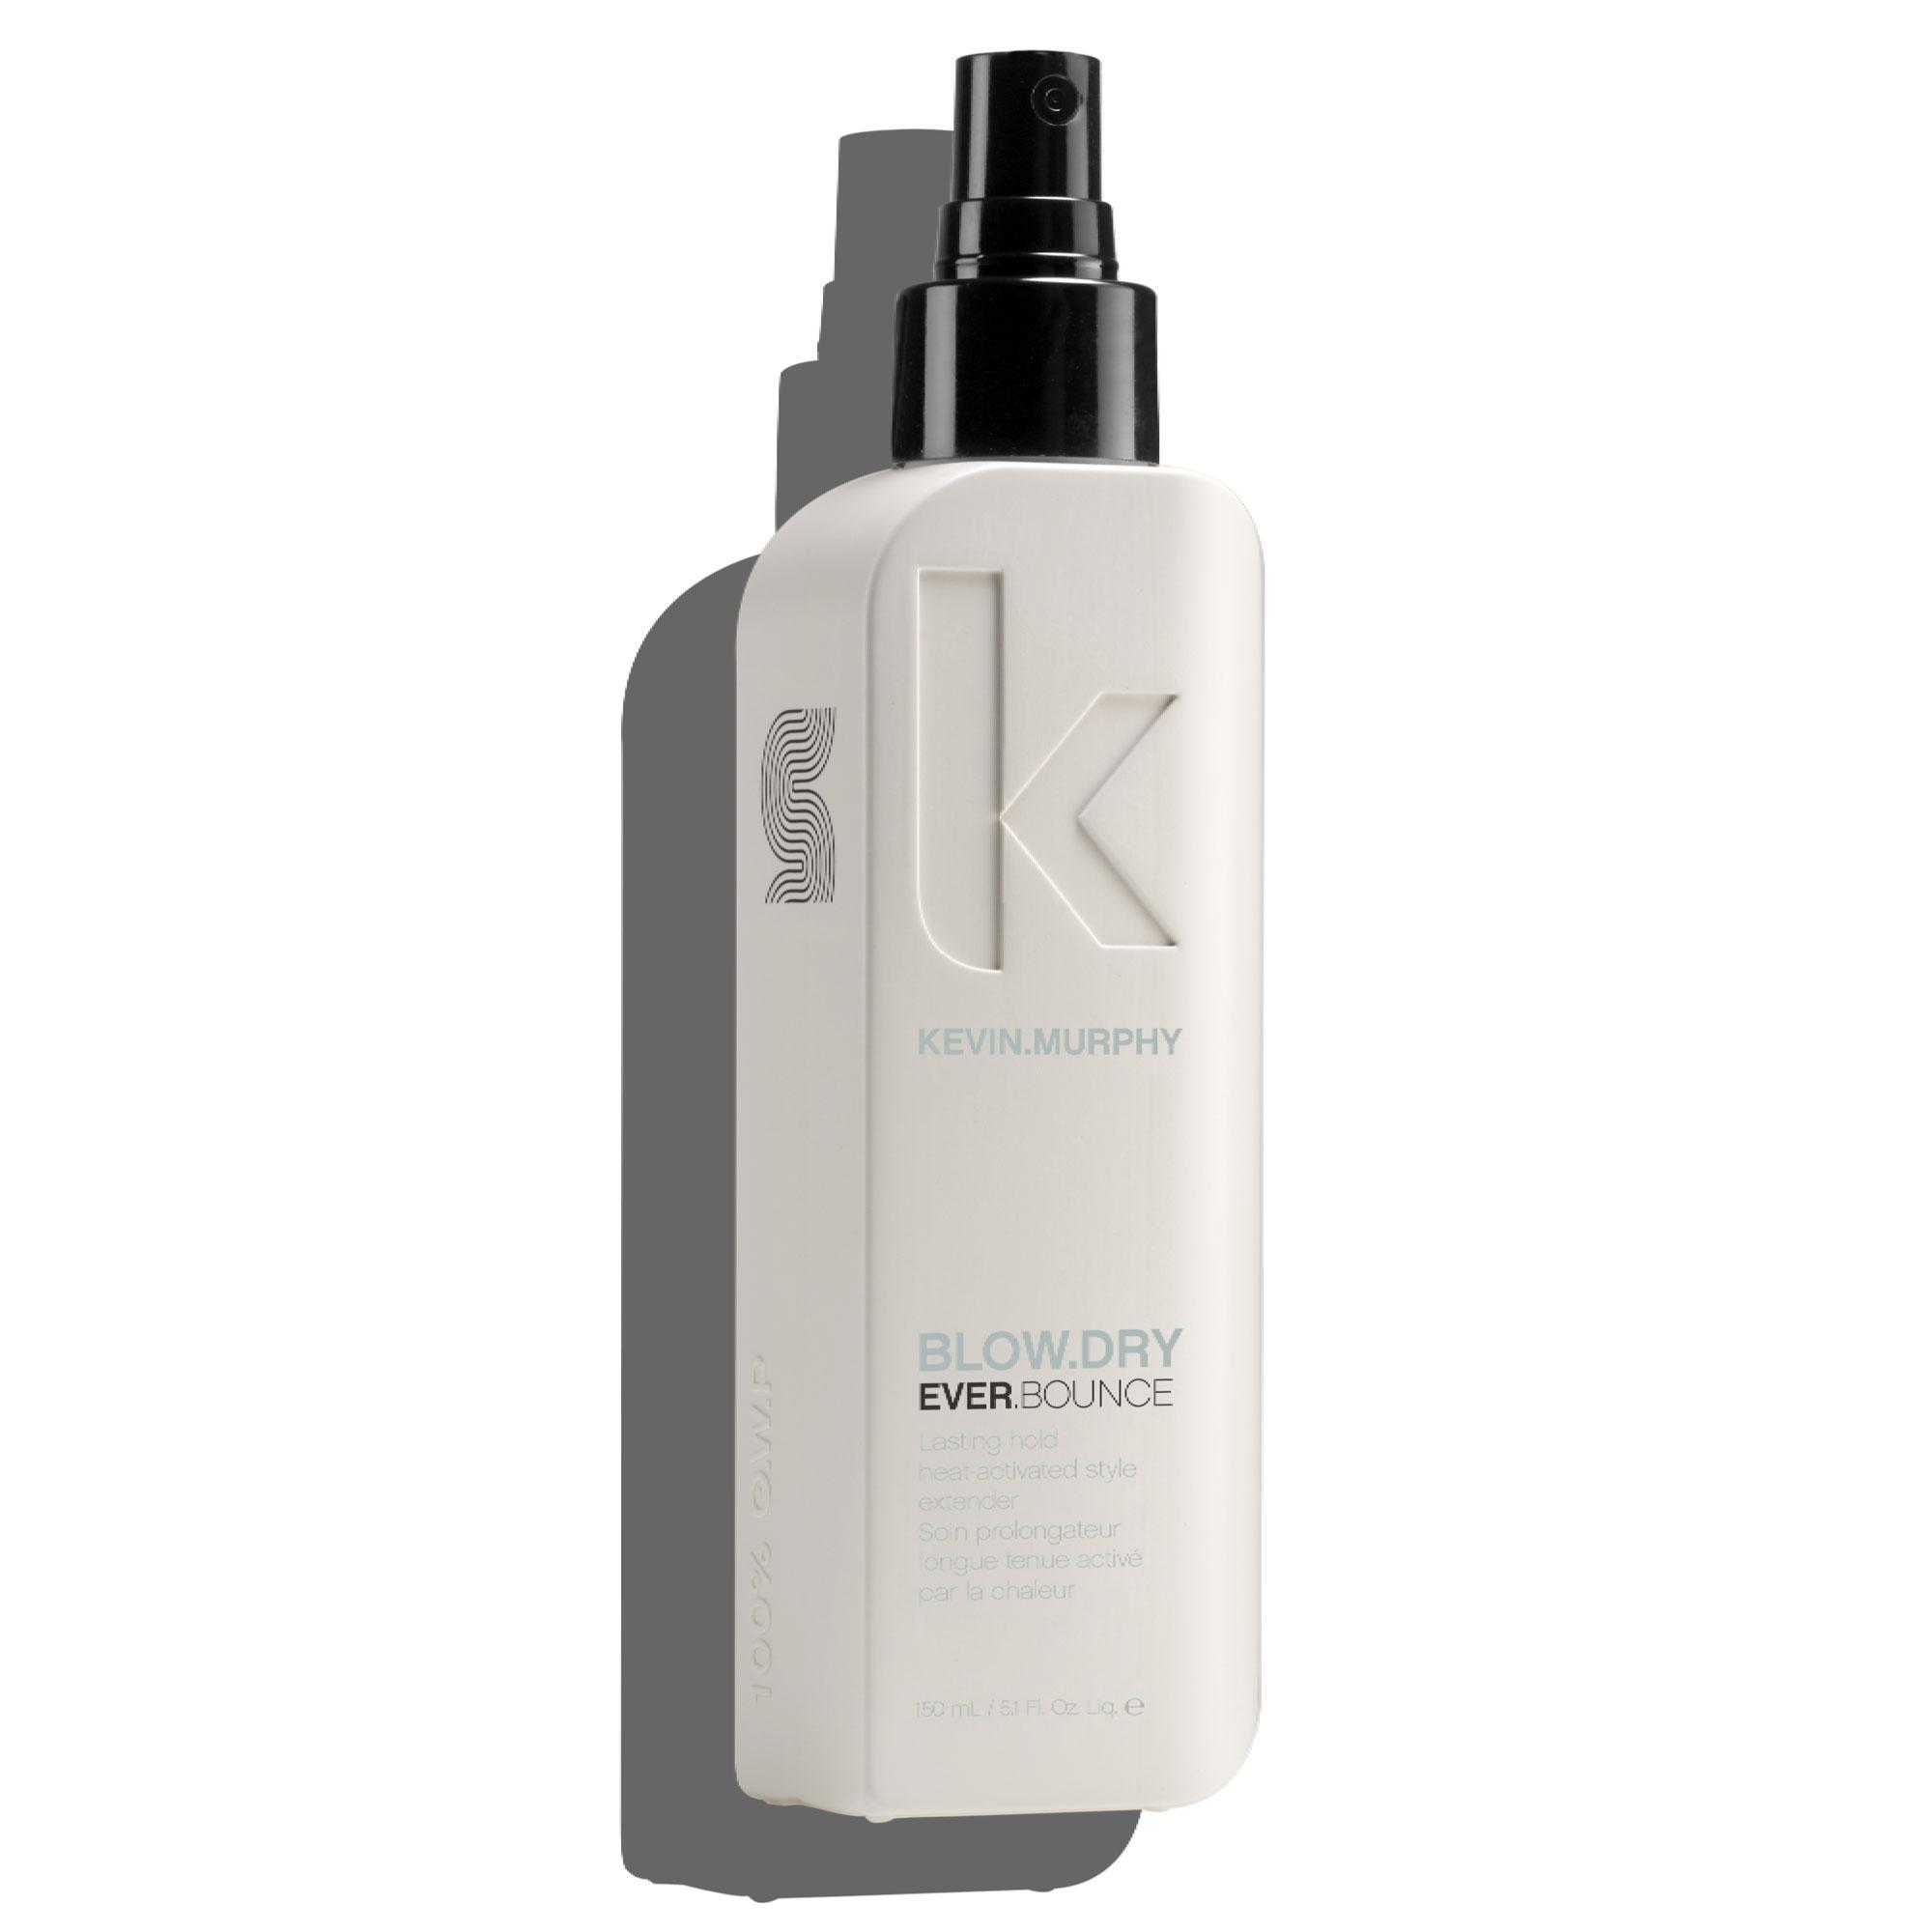 KEVIN.MURPHY BLOW.DRY EVER.BOUNCE